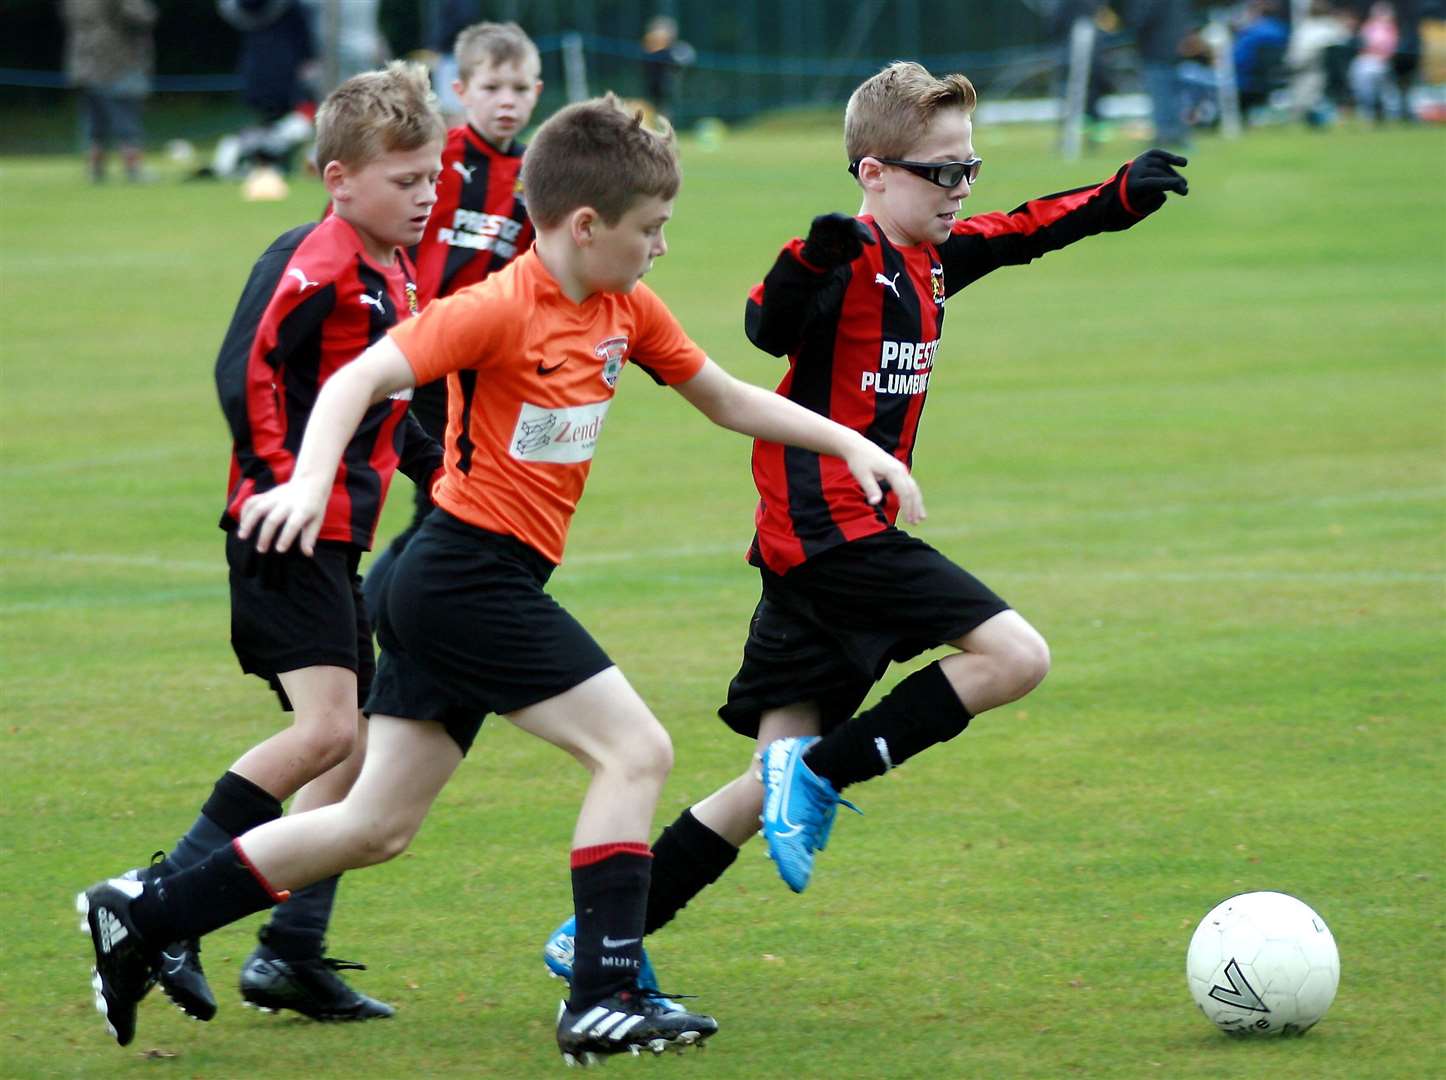 Lordswood Youth under-11s (orange) battle Woodcoombe Youth under-11s for the ball Picture: Phil Lee